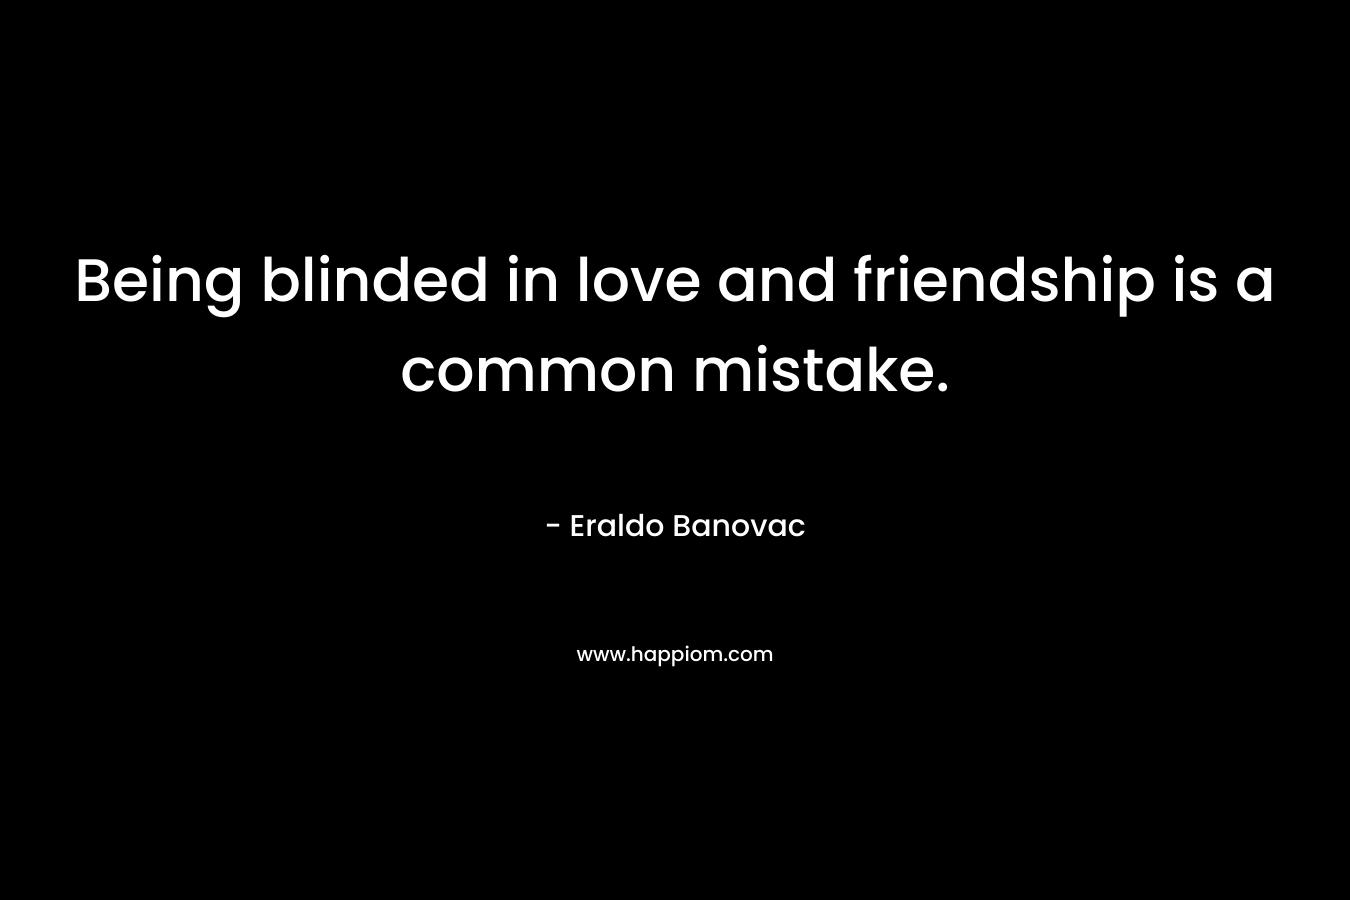 Being blinded in love and friendship is a common mistake.